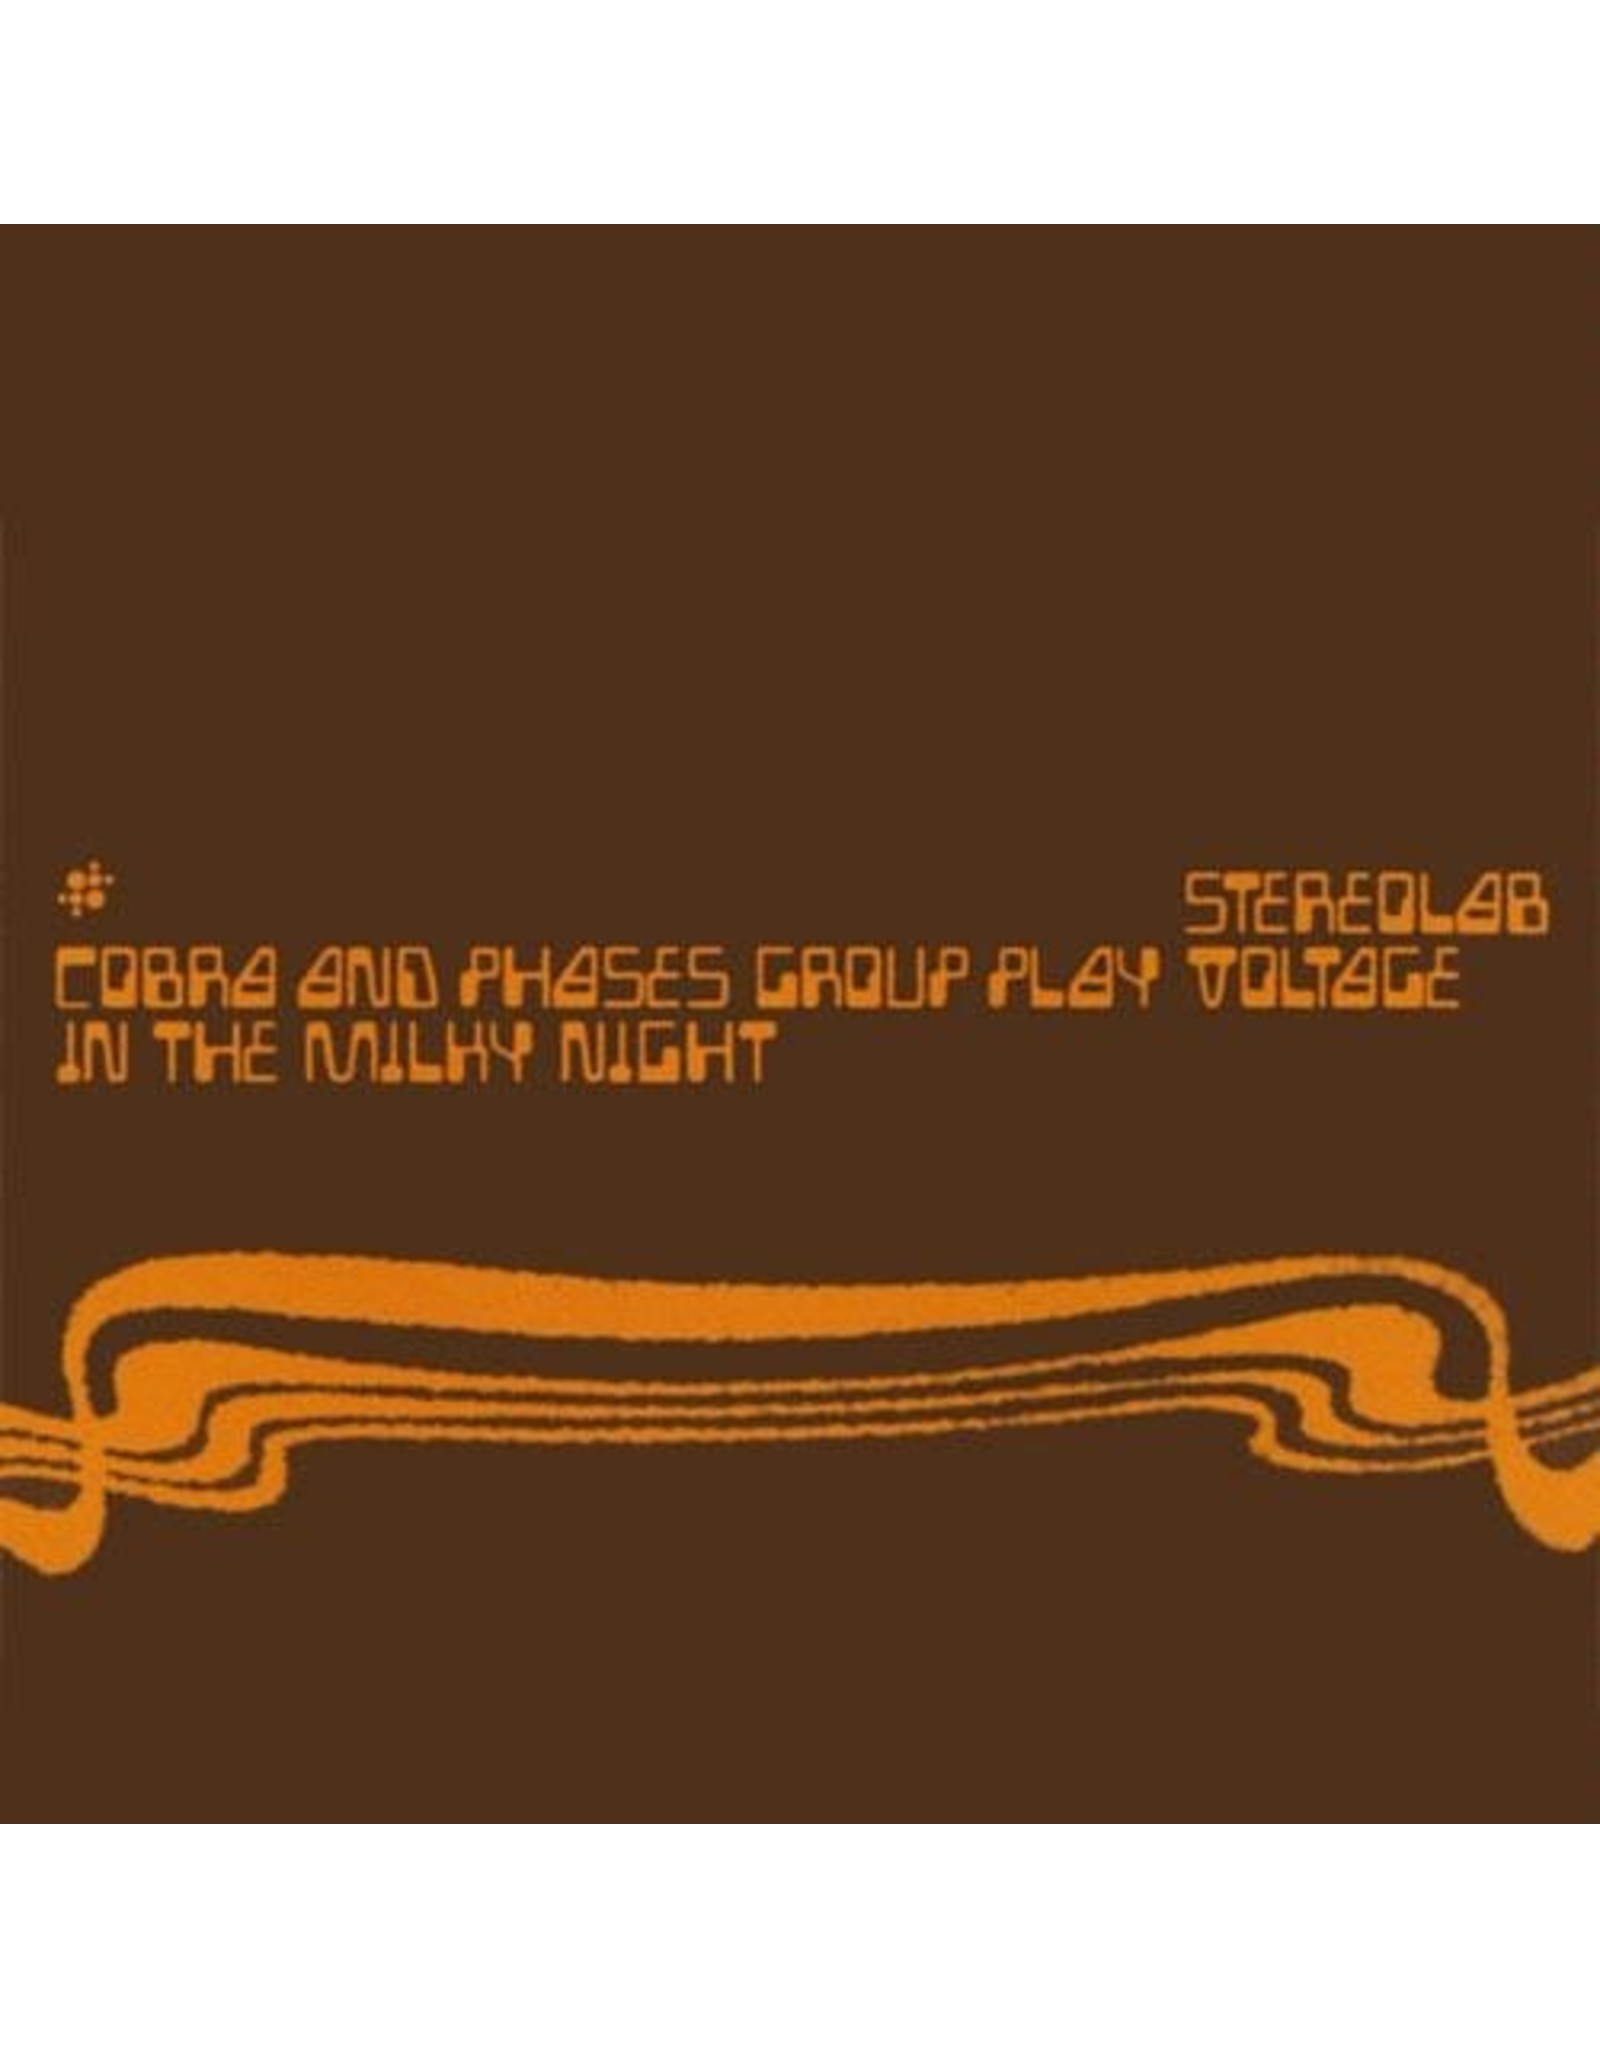 New Vinyl Stereolab - Cobra And Phases Group Play Voltage In The Milky Night (Expanded) 3LP